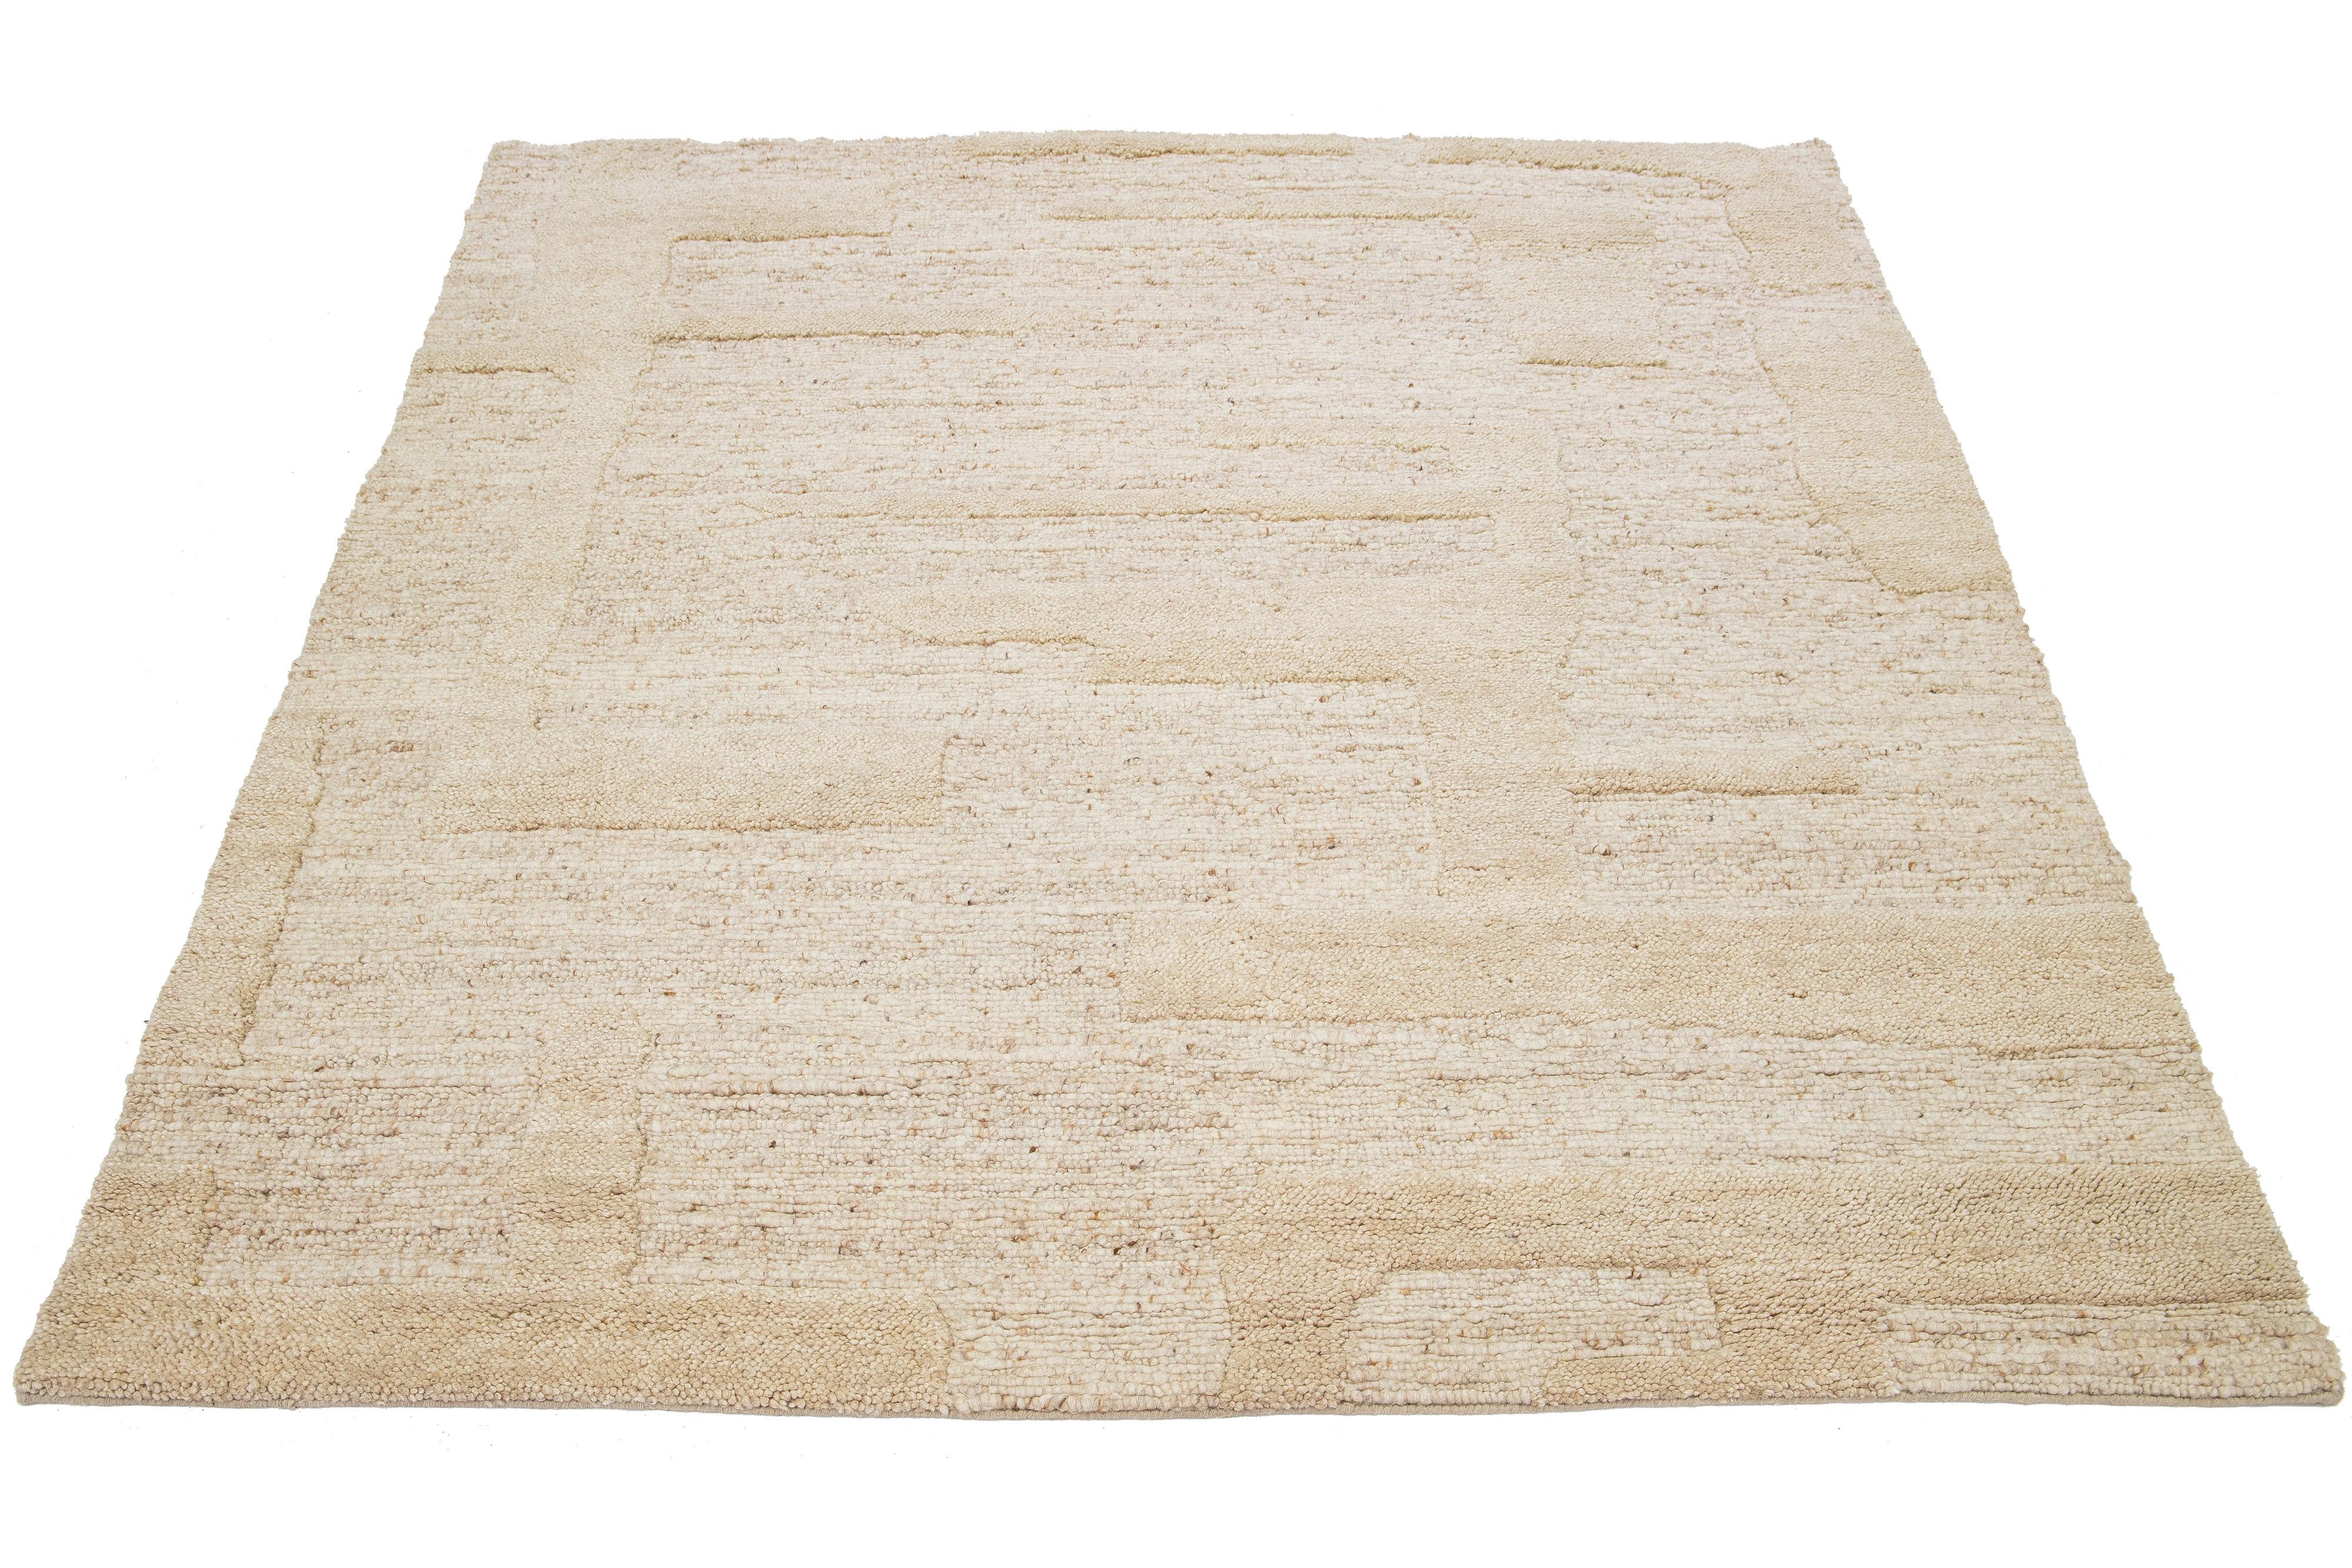 This Moroccan-style wool rug is hand-knotted, boasting a beautiful modern design with a natural beige-tan field. The rug showcases a stunning geometric pattern.

This rug measures 8' x 10'.